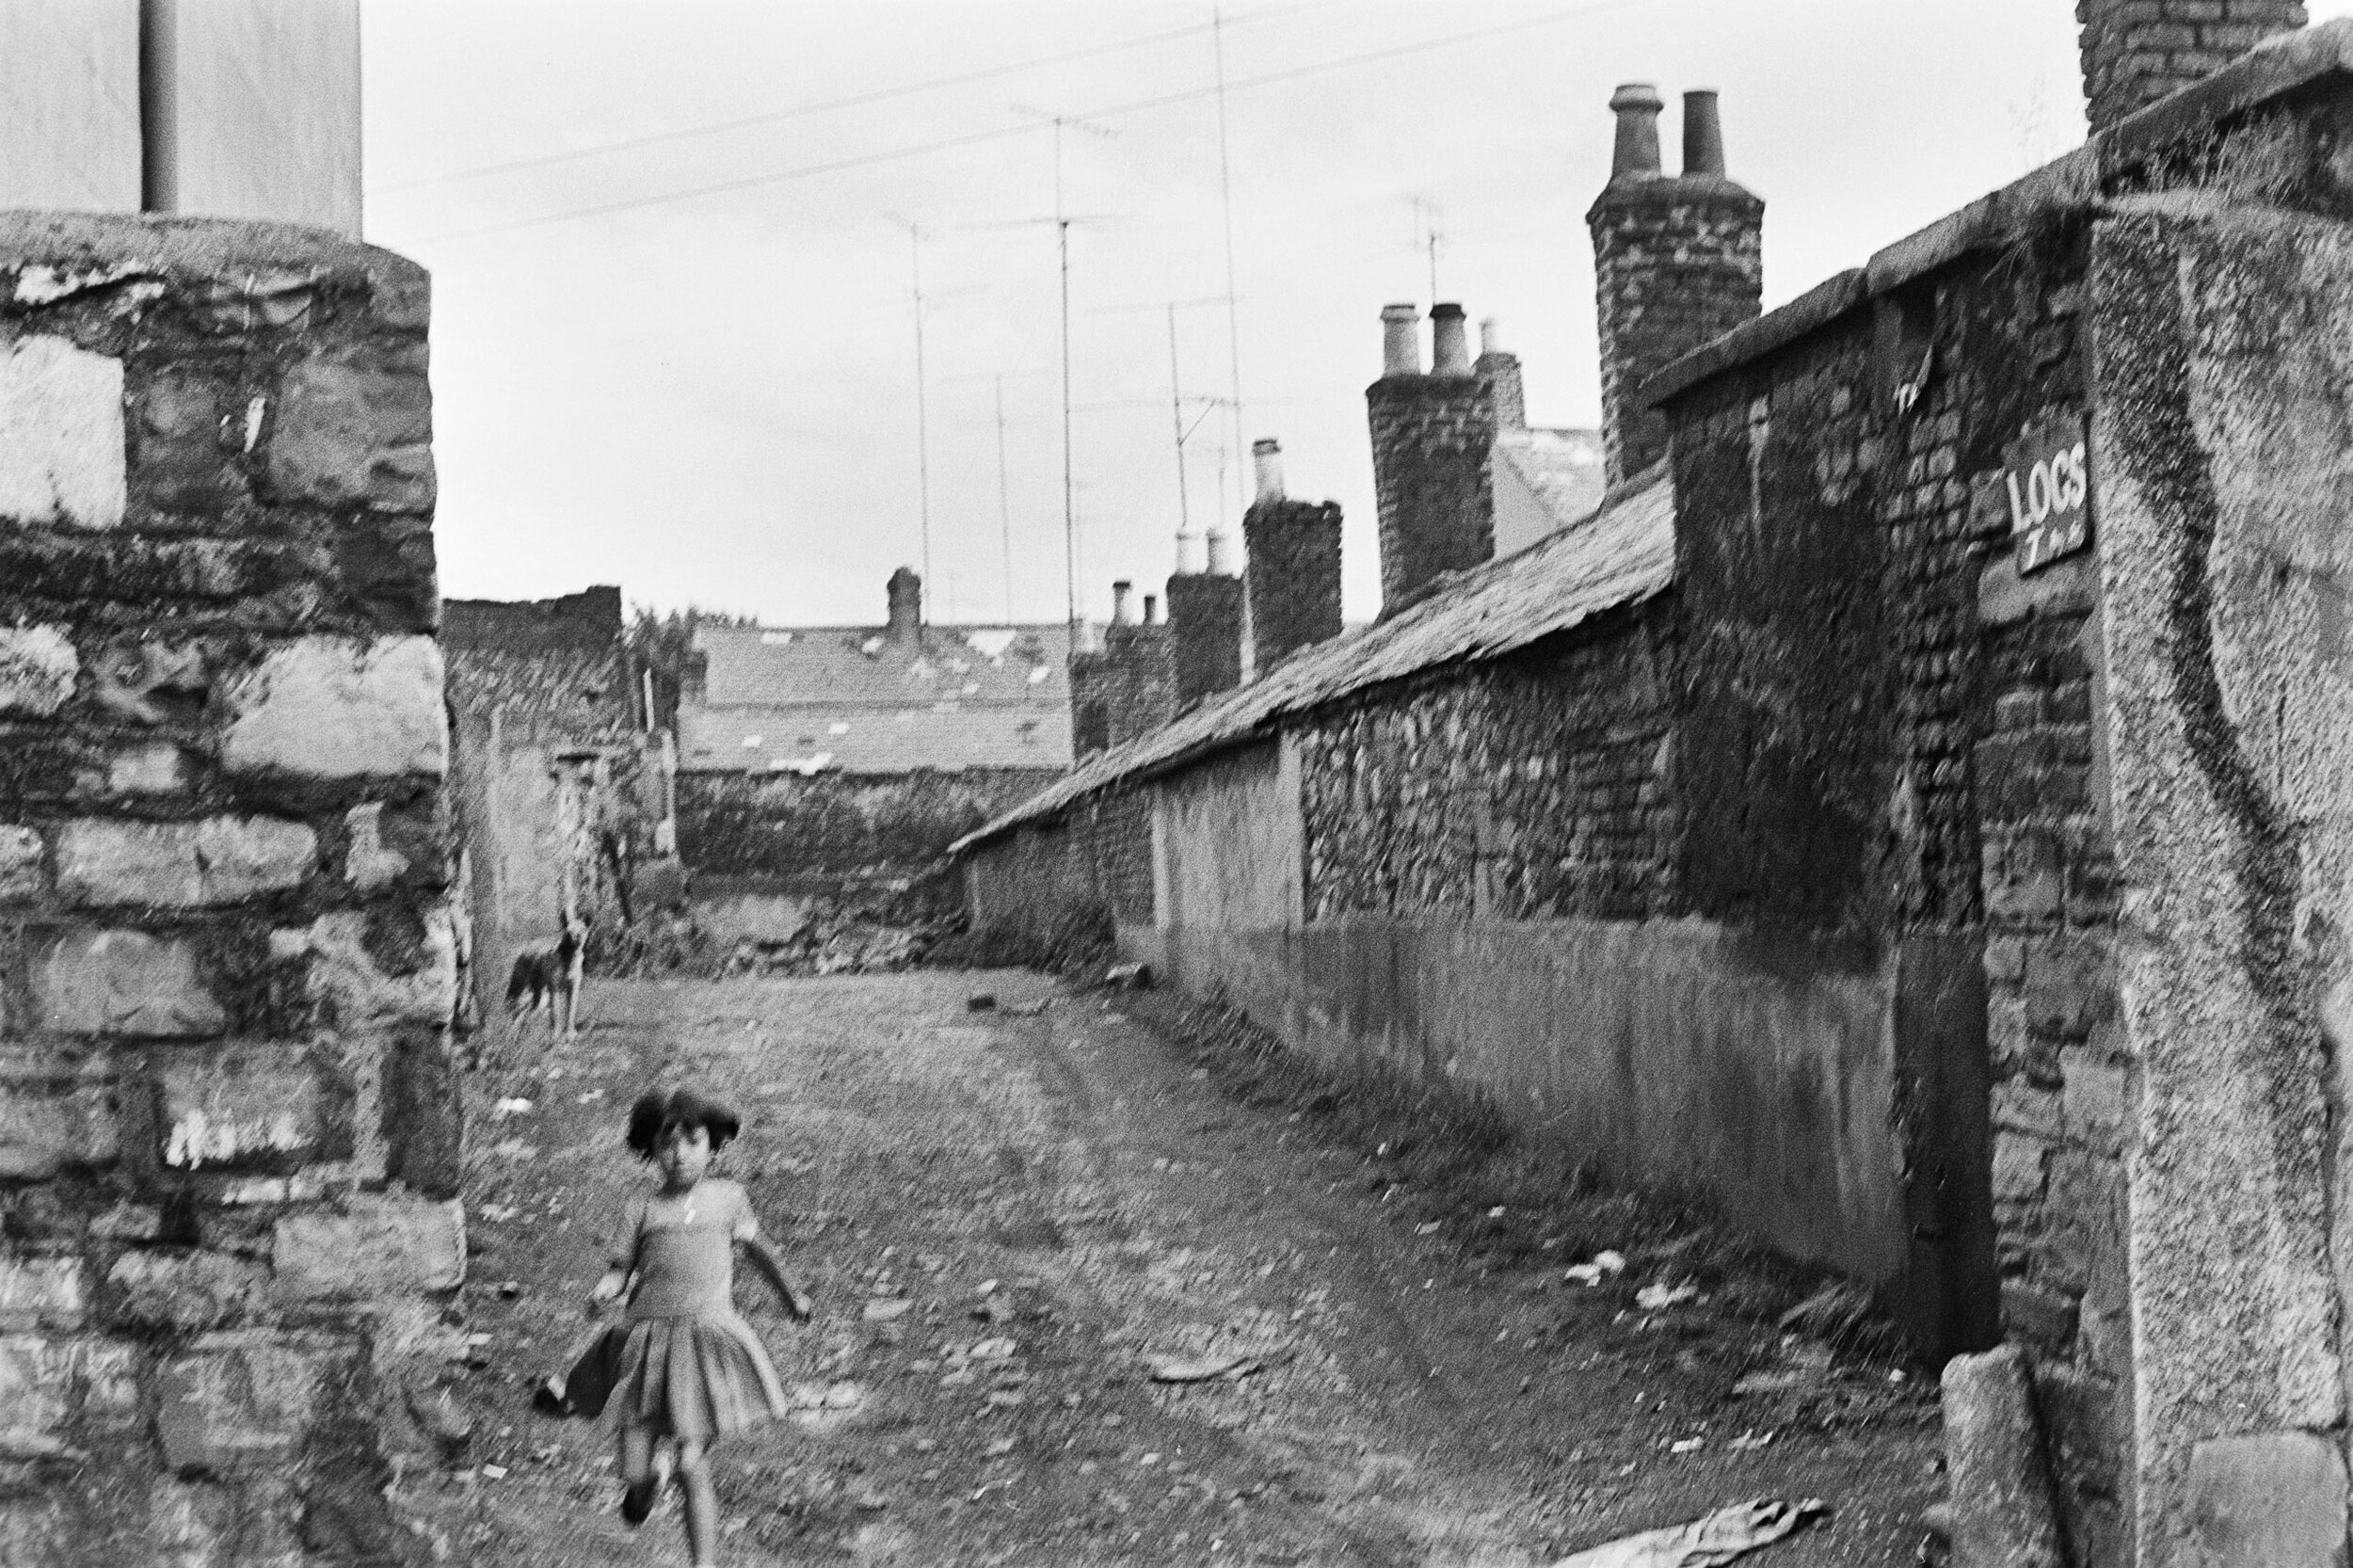 a blurry black and white photo of a wide backalley, a child is running out of it and a dog is in the background